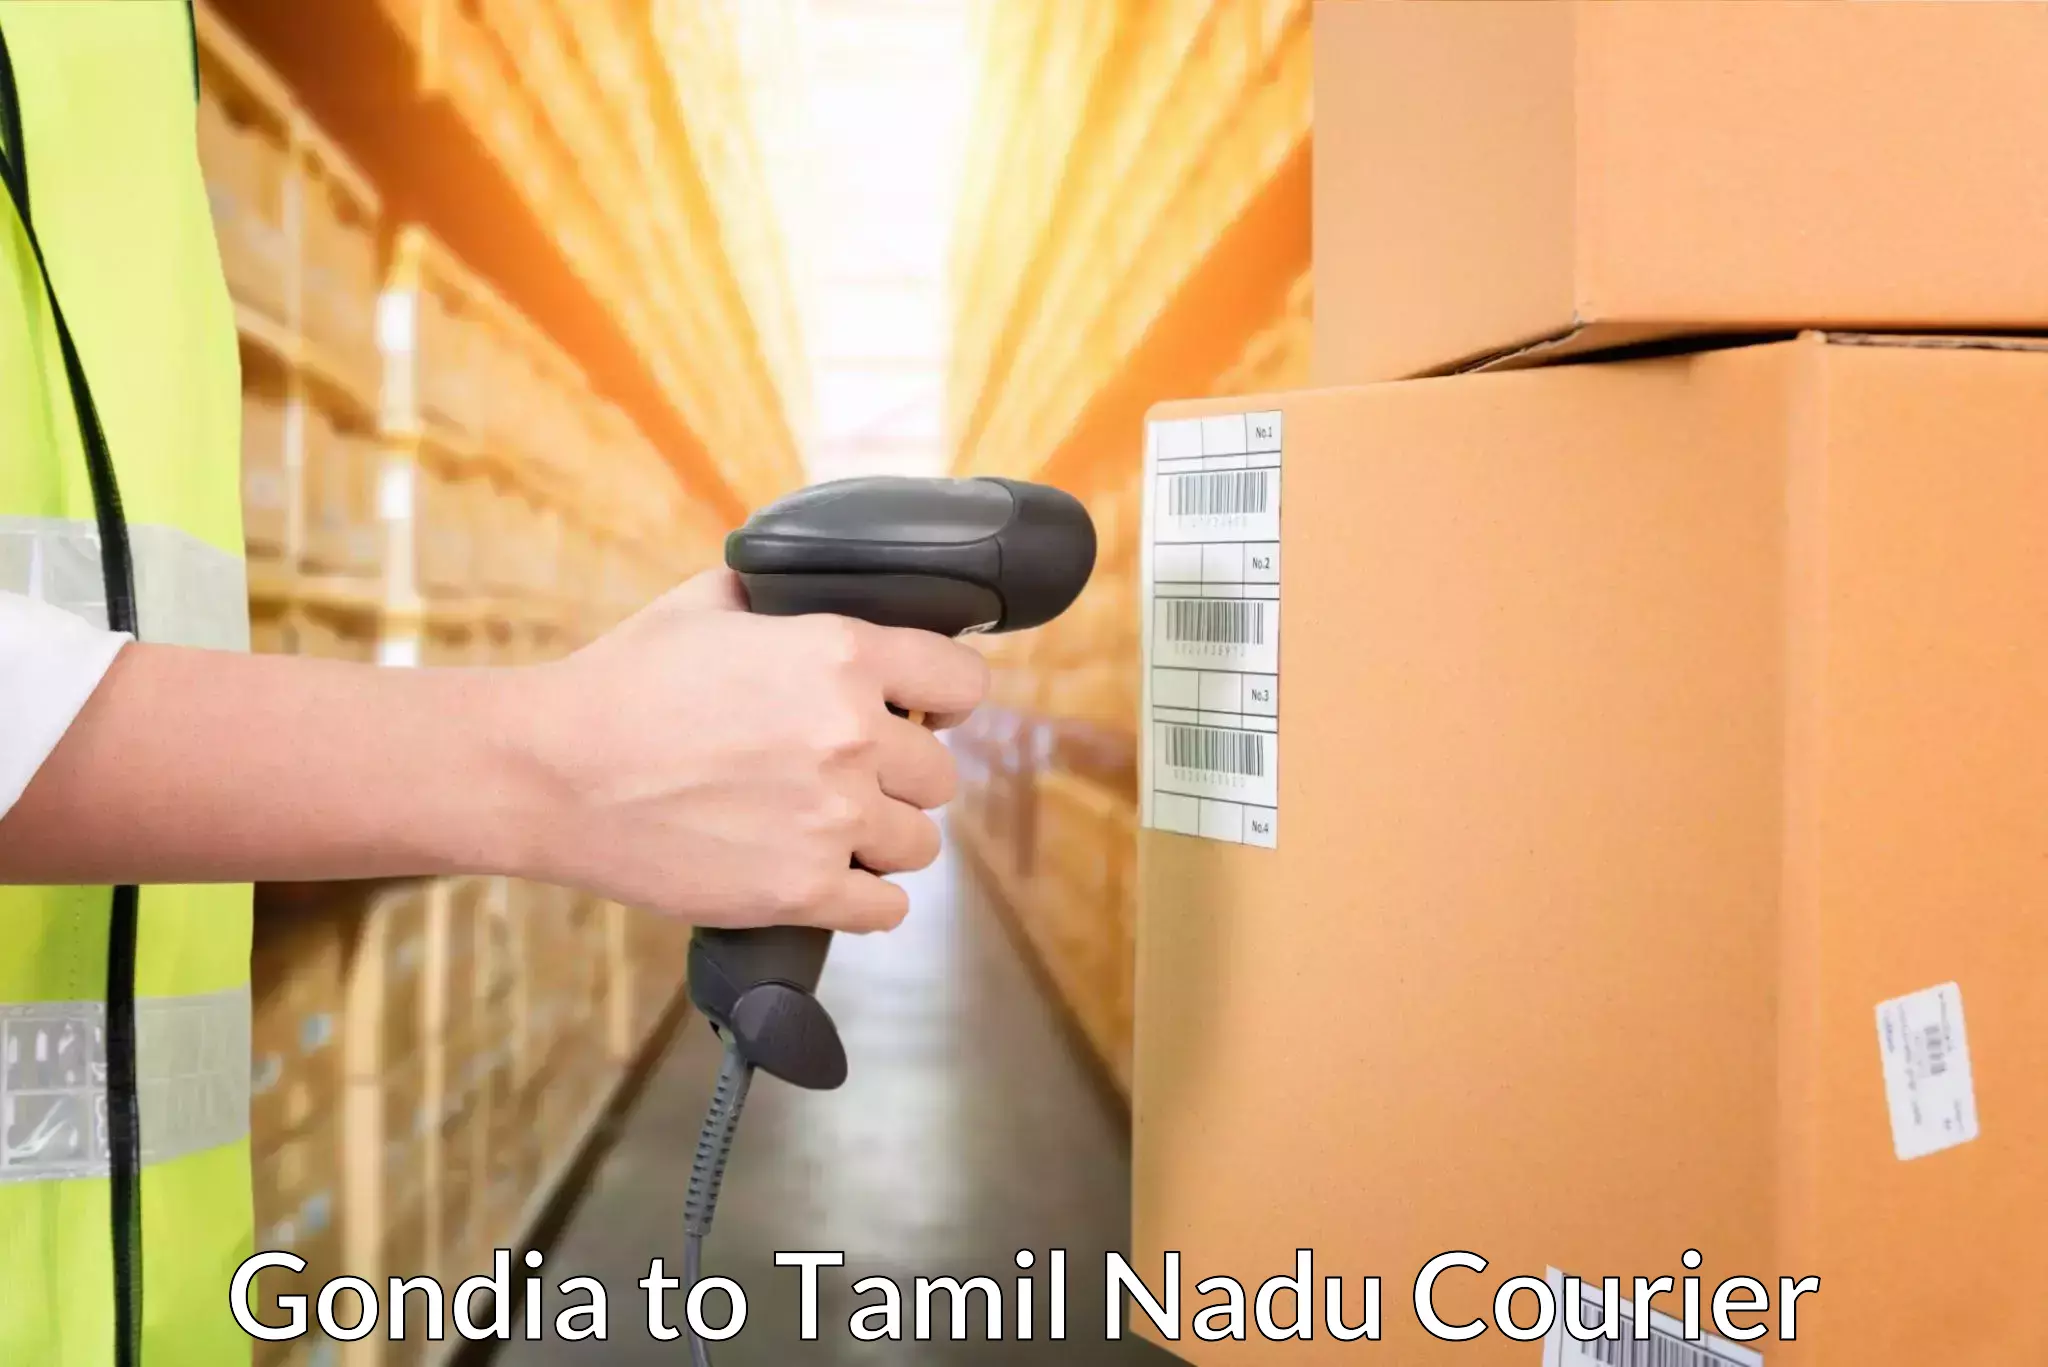 Sustainable shipping practices Gondia to Tamil Nadu